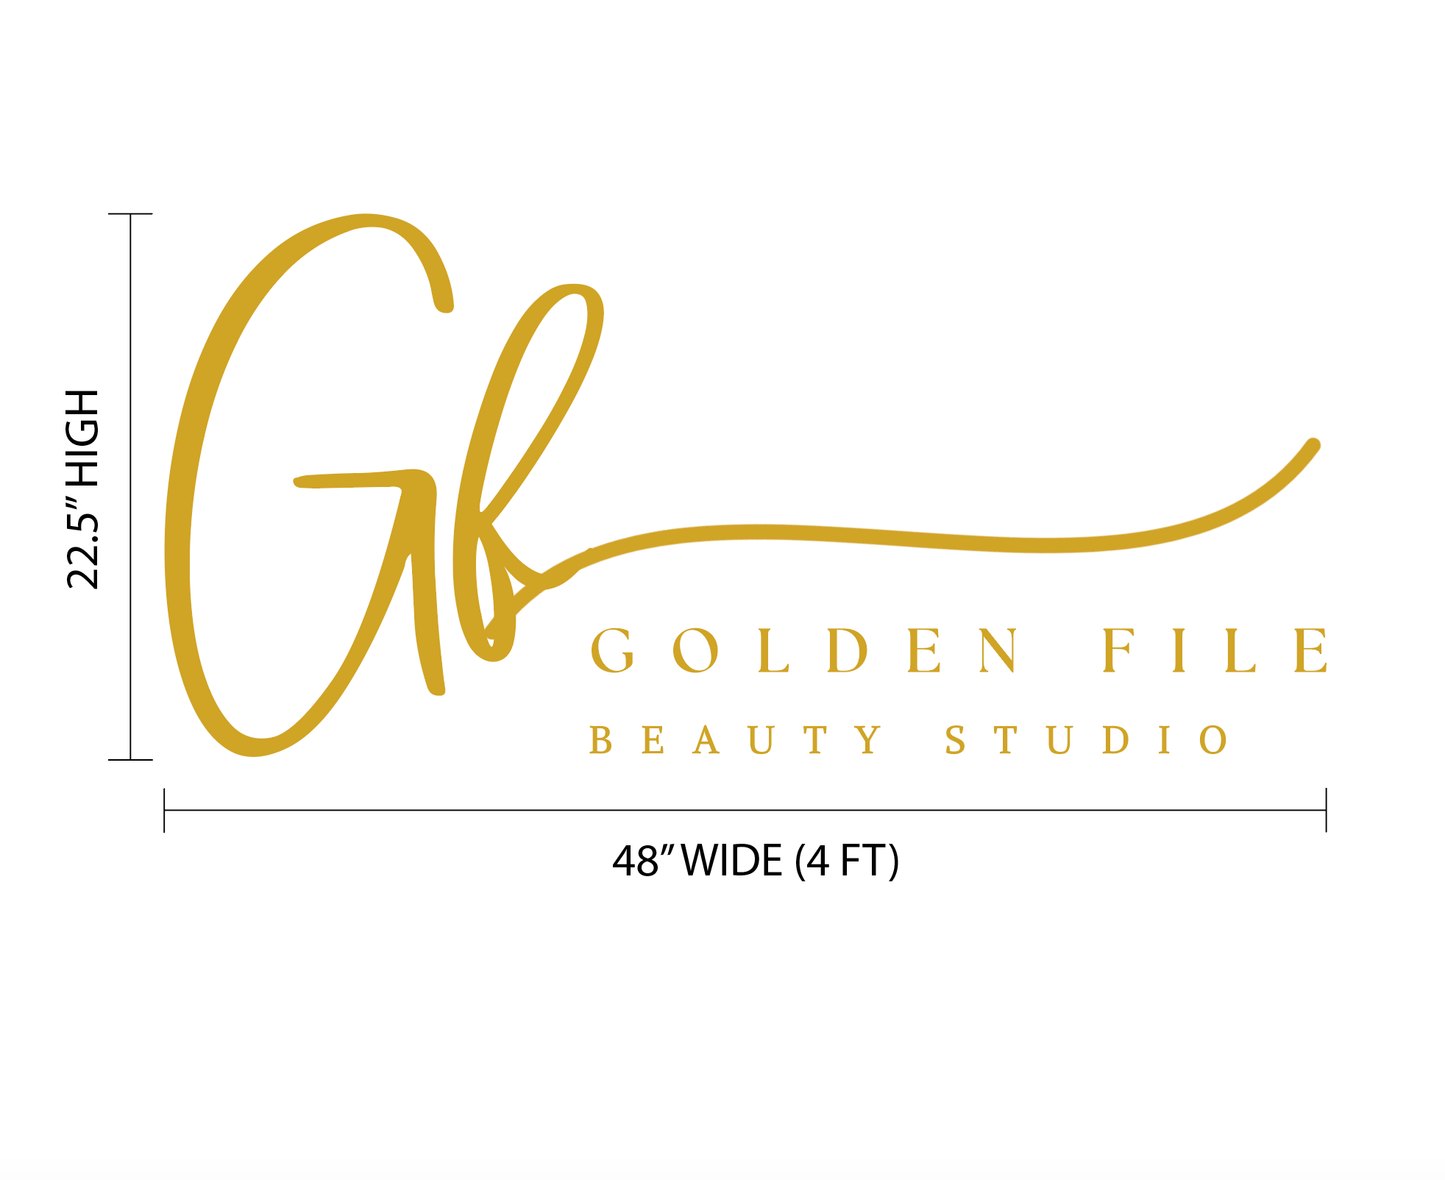 Custom Business Signage for Golden File Beauty Studio Name Sign - VividEditions